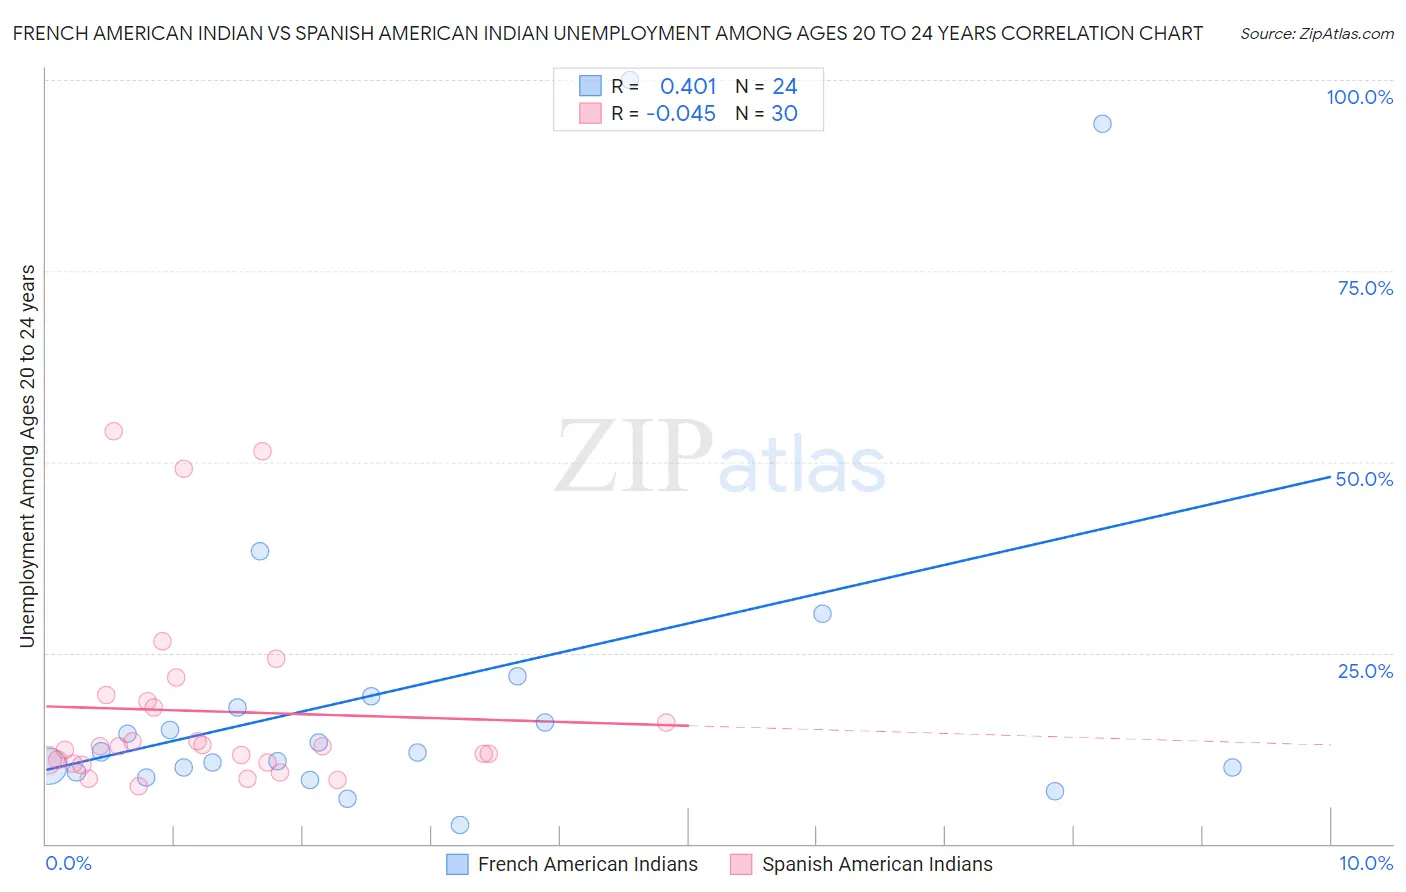 French American Indian vs Spanish American Indian Unemployment Among Ages 20 to 24 years